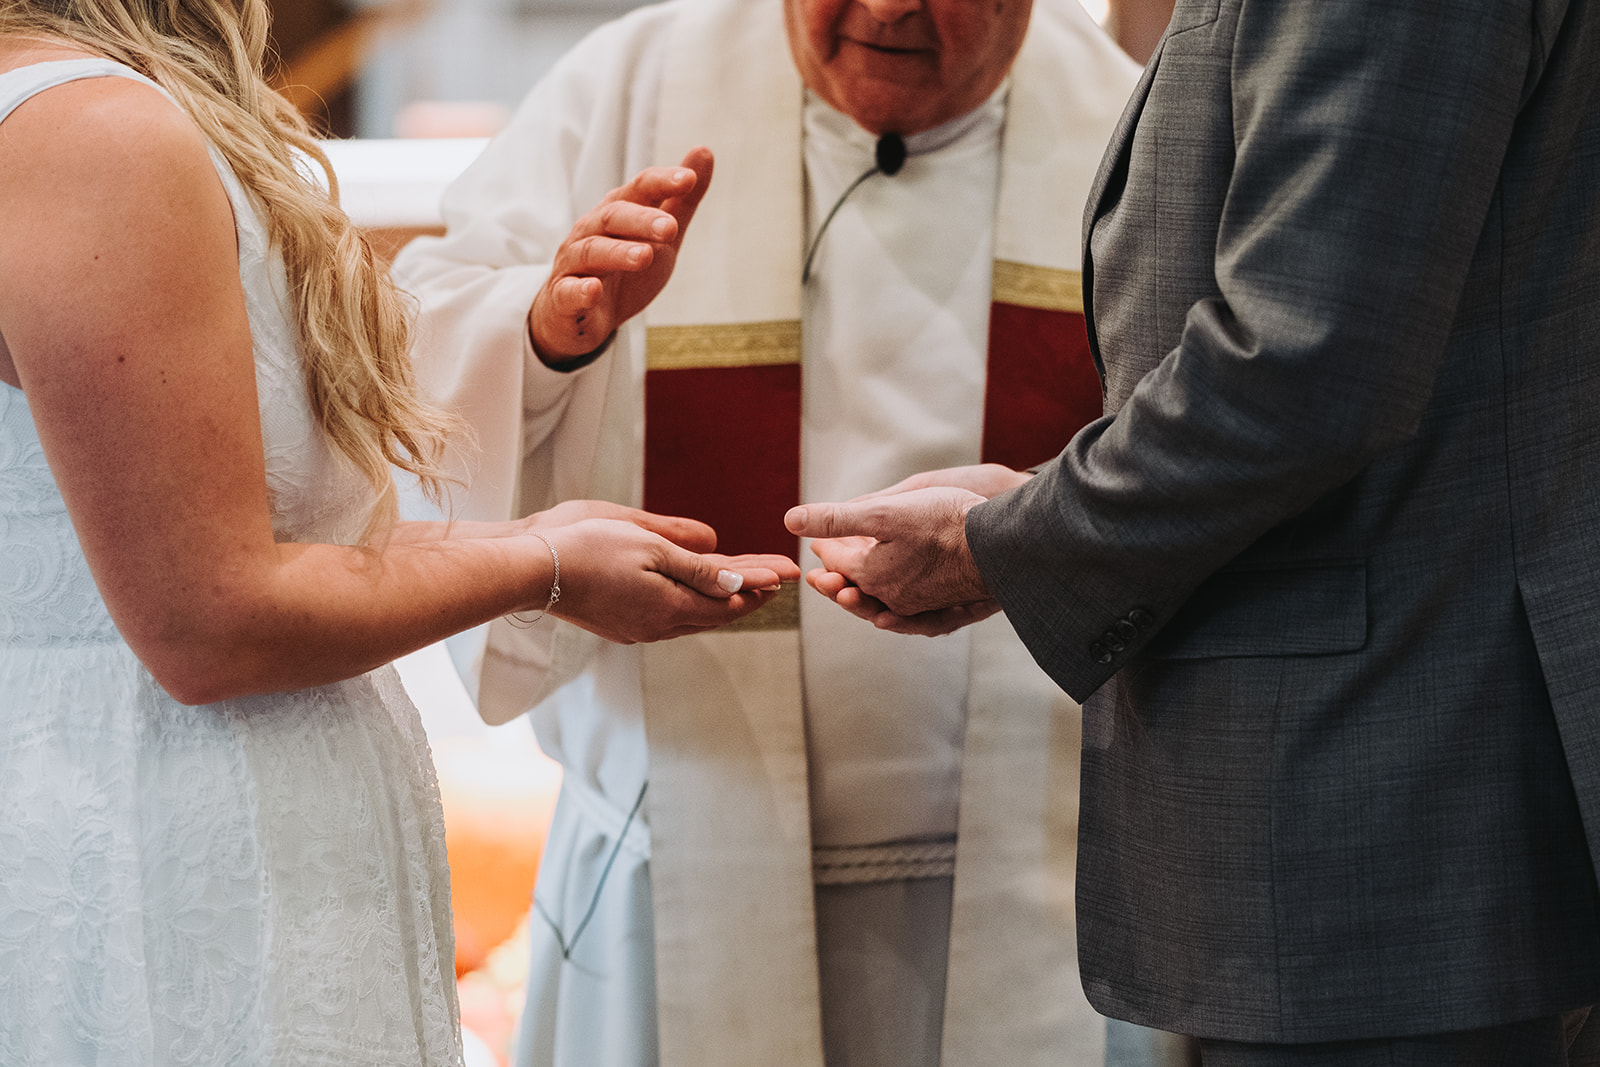 Blessing the wedding rings at the alter. 